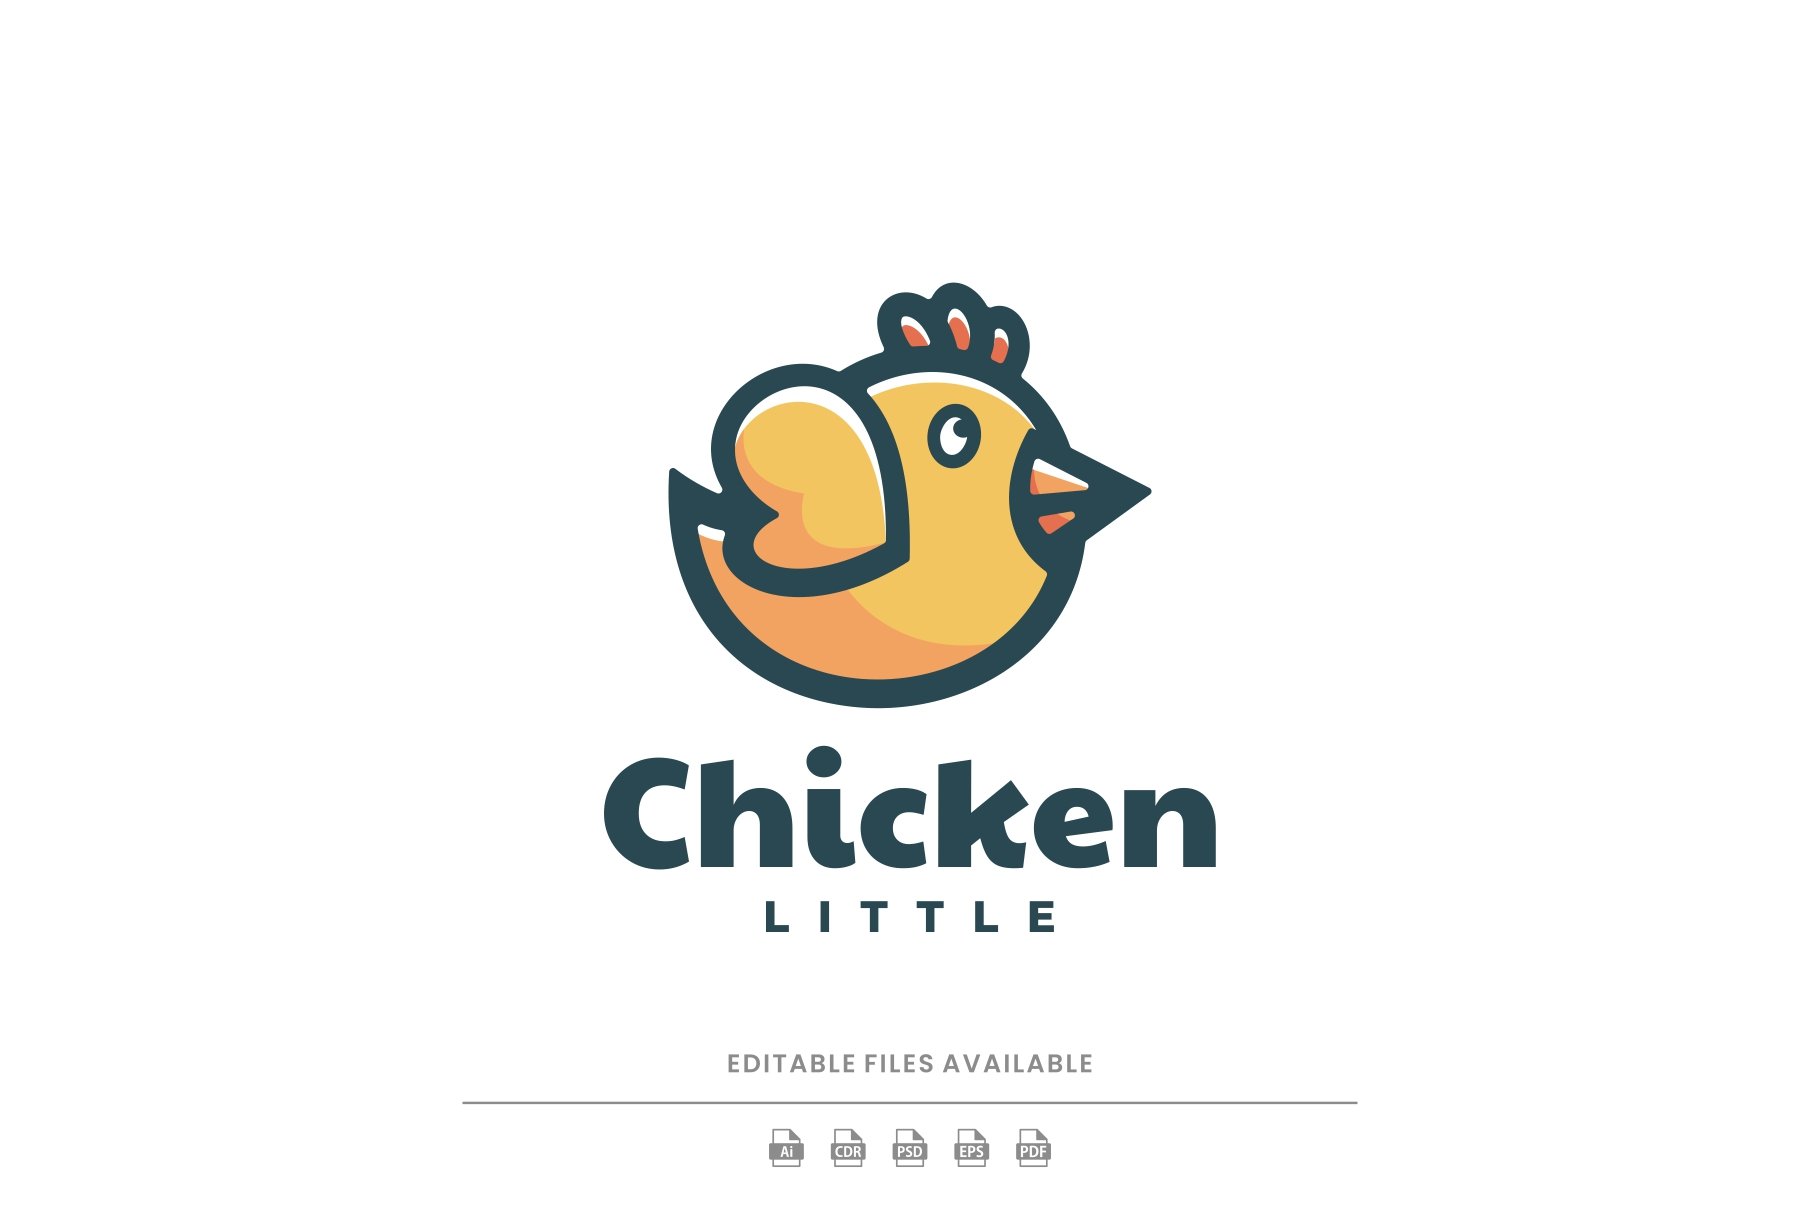 Little Chicken Simple Mascot Logo cover image.